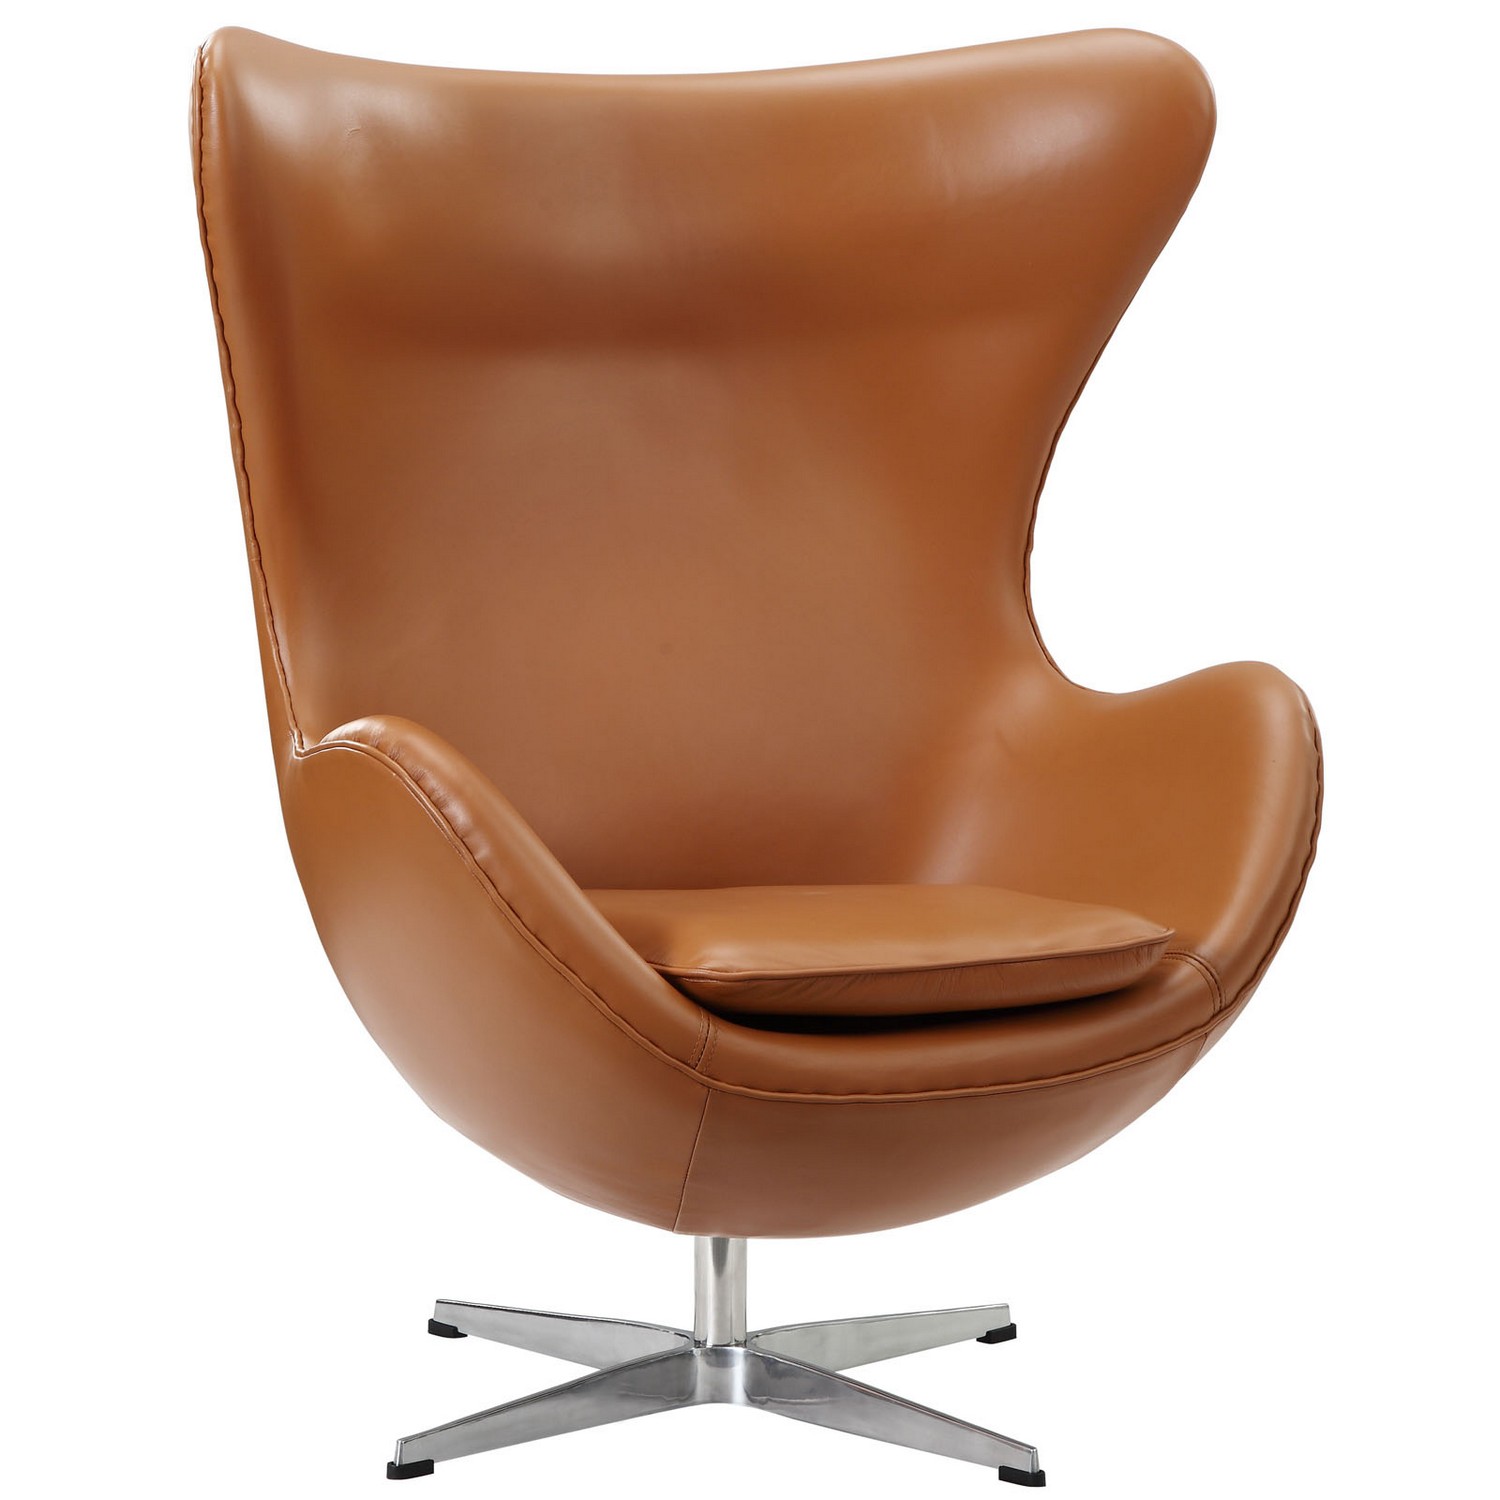 Modway Glove Leather Lounge Chair - Terracotta